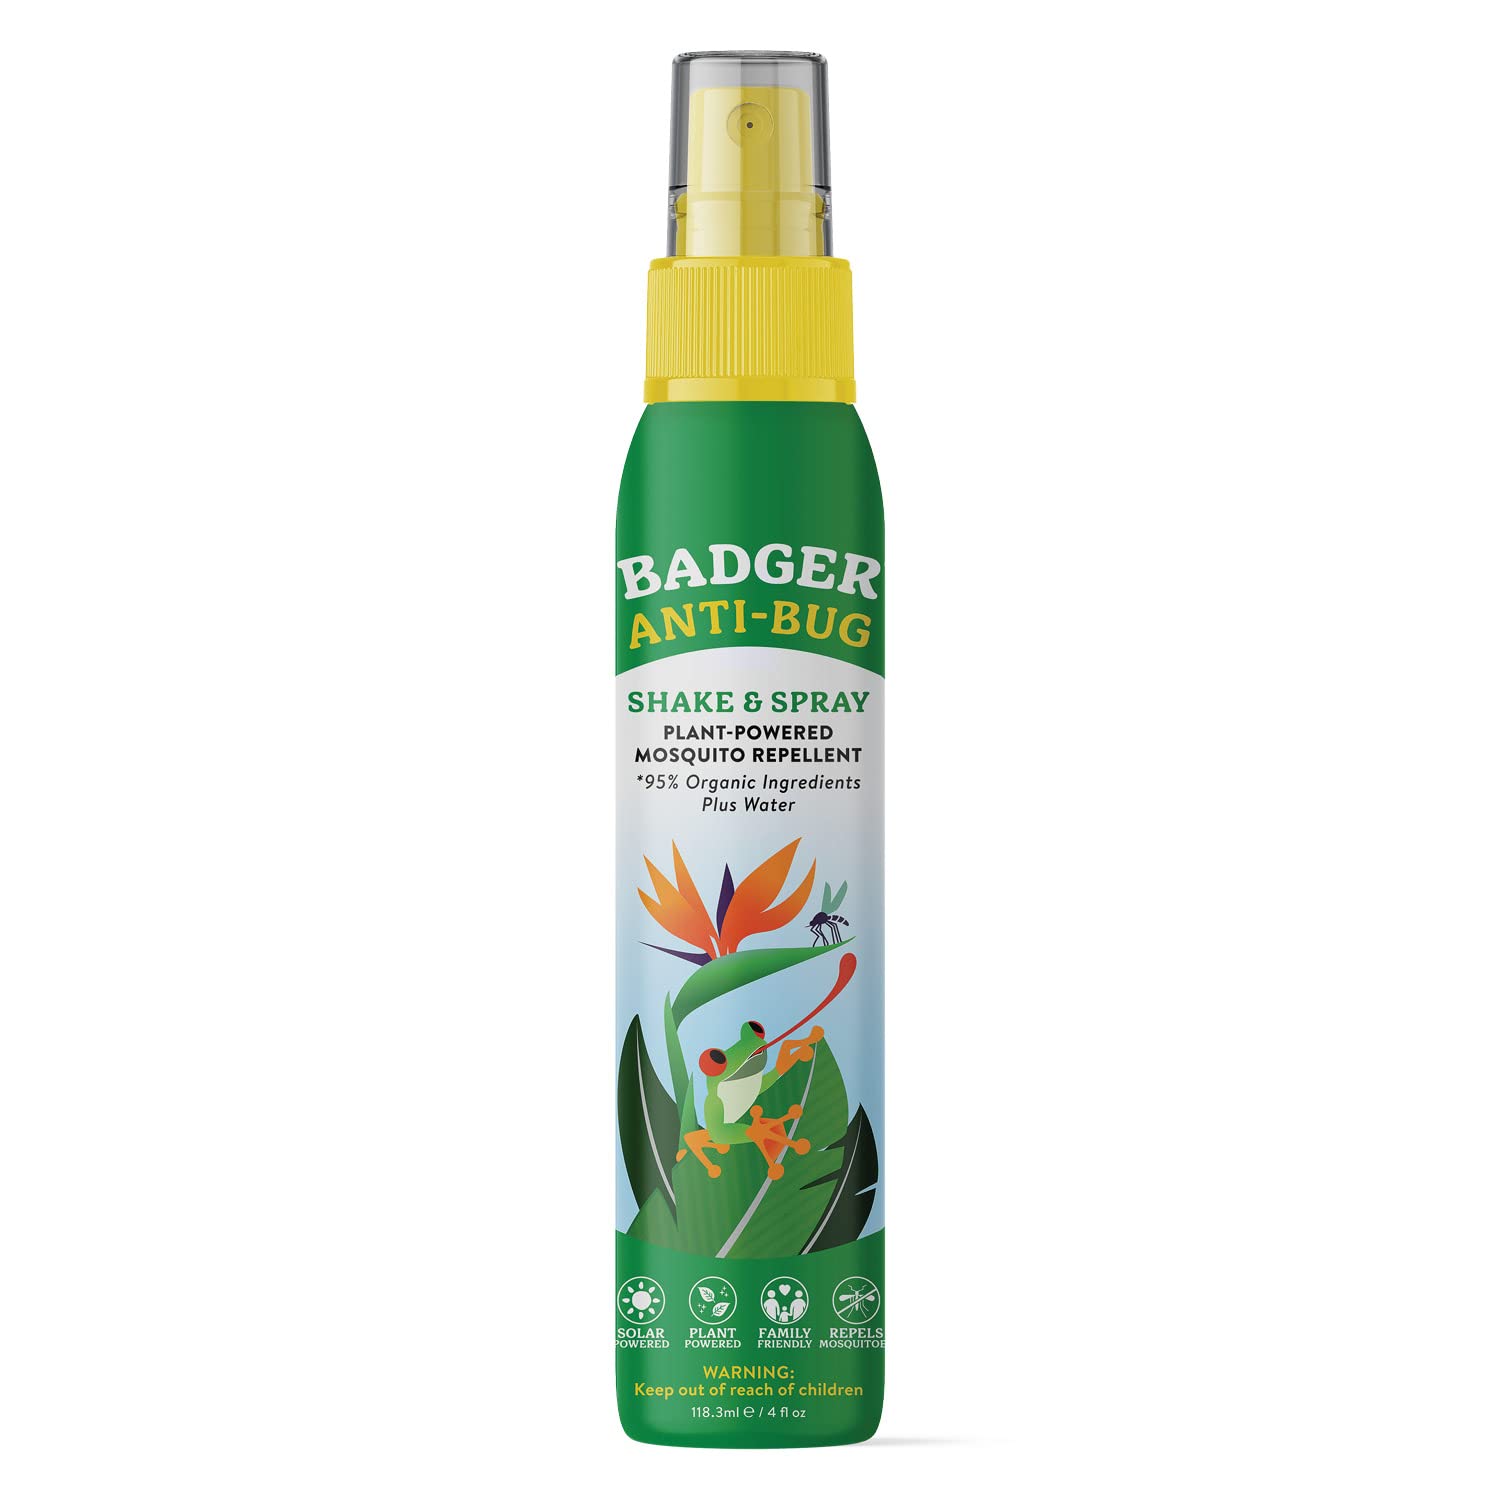 Badger Bug Spray, Organic Deet Free Mosquito Repellent with Citronella & Lemongrass, Natural Bug Spray for People, Family Friendly Bug Repellent, 4 fl oz